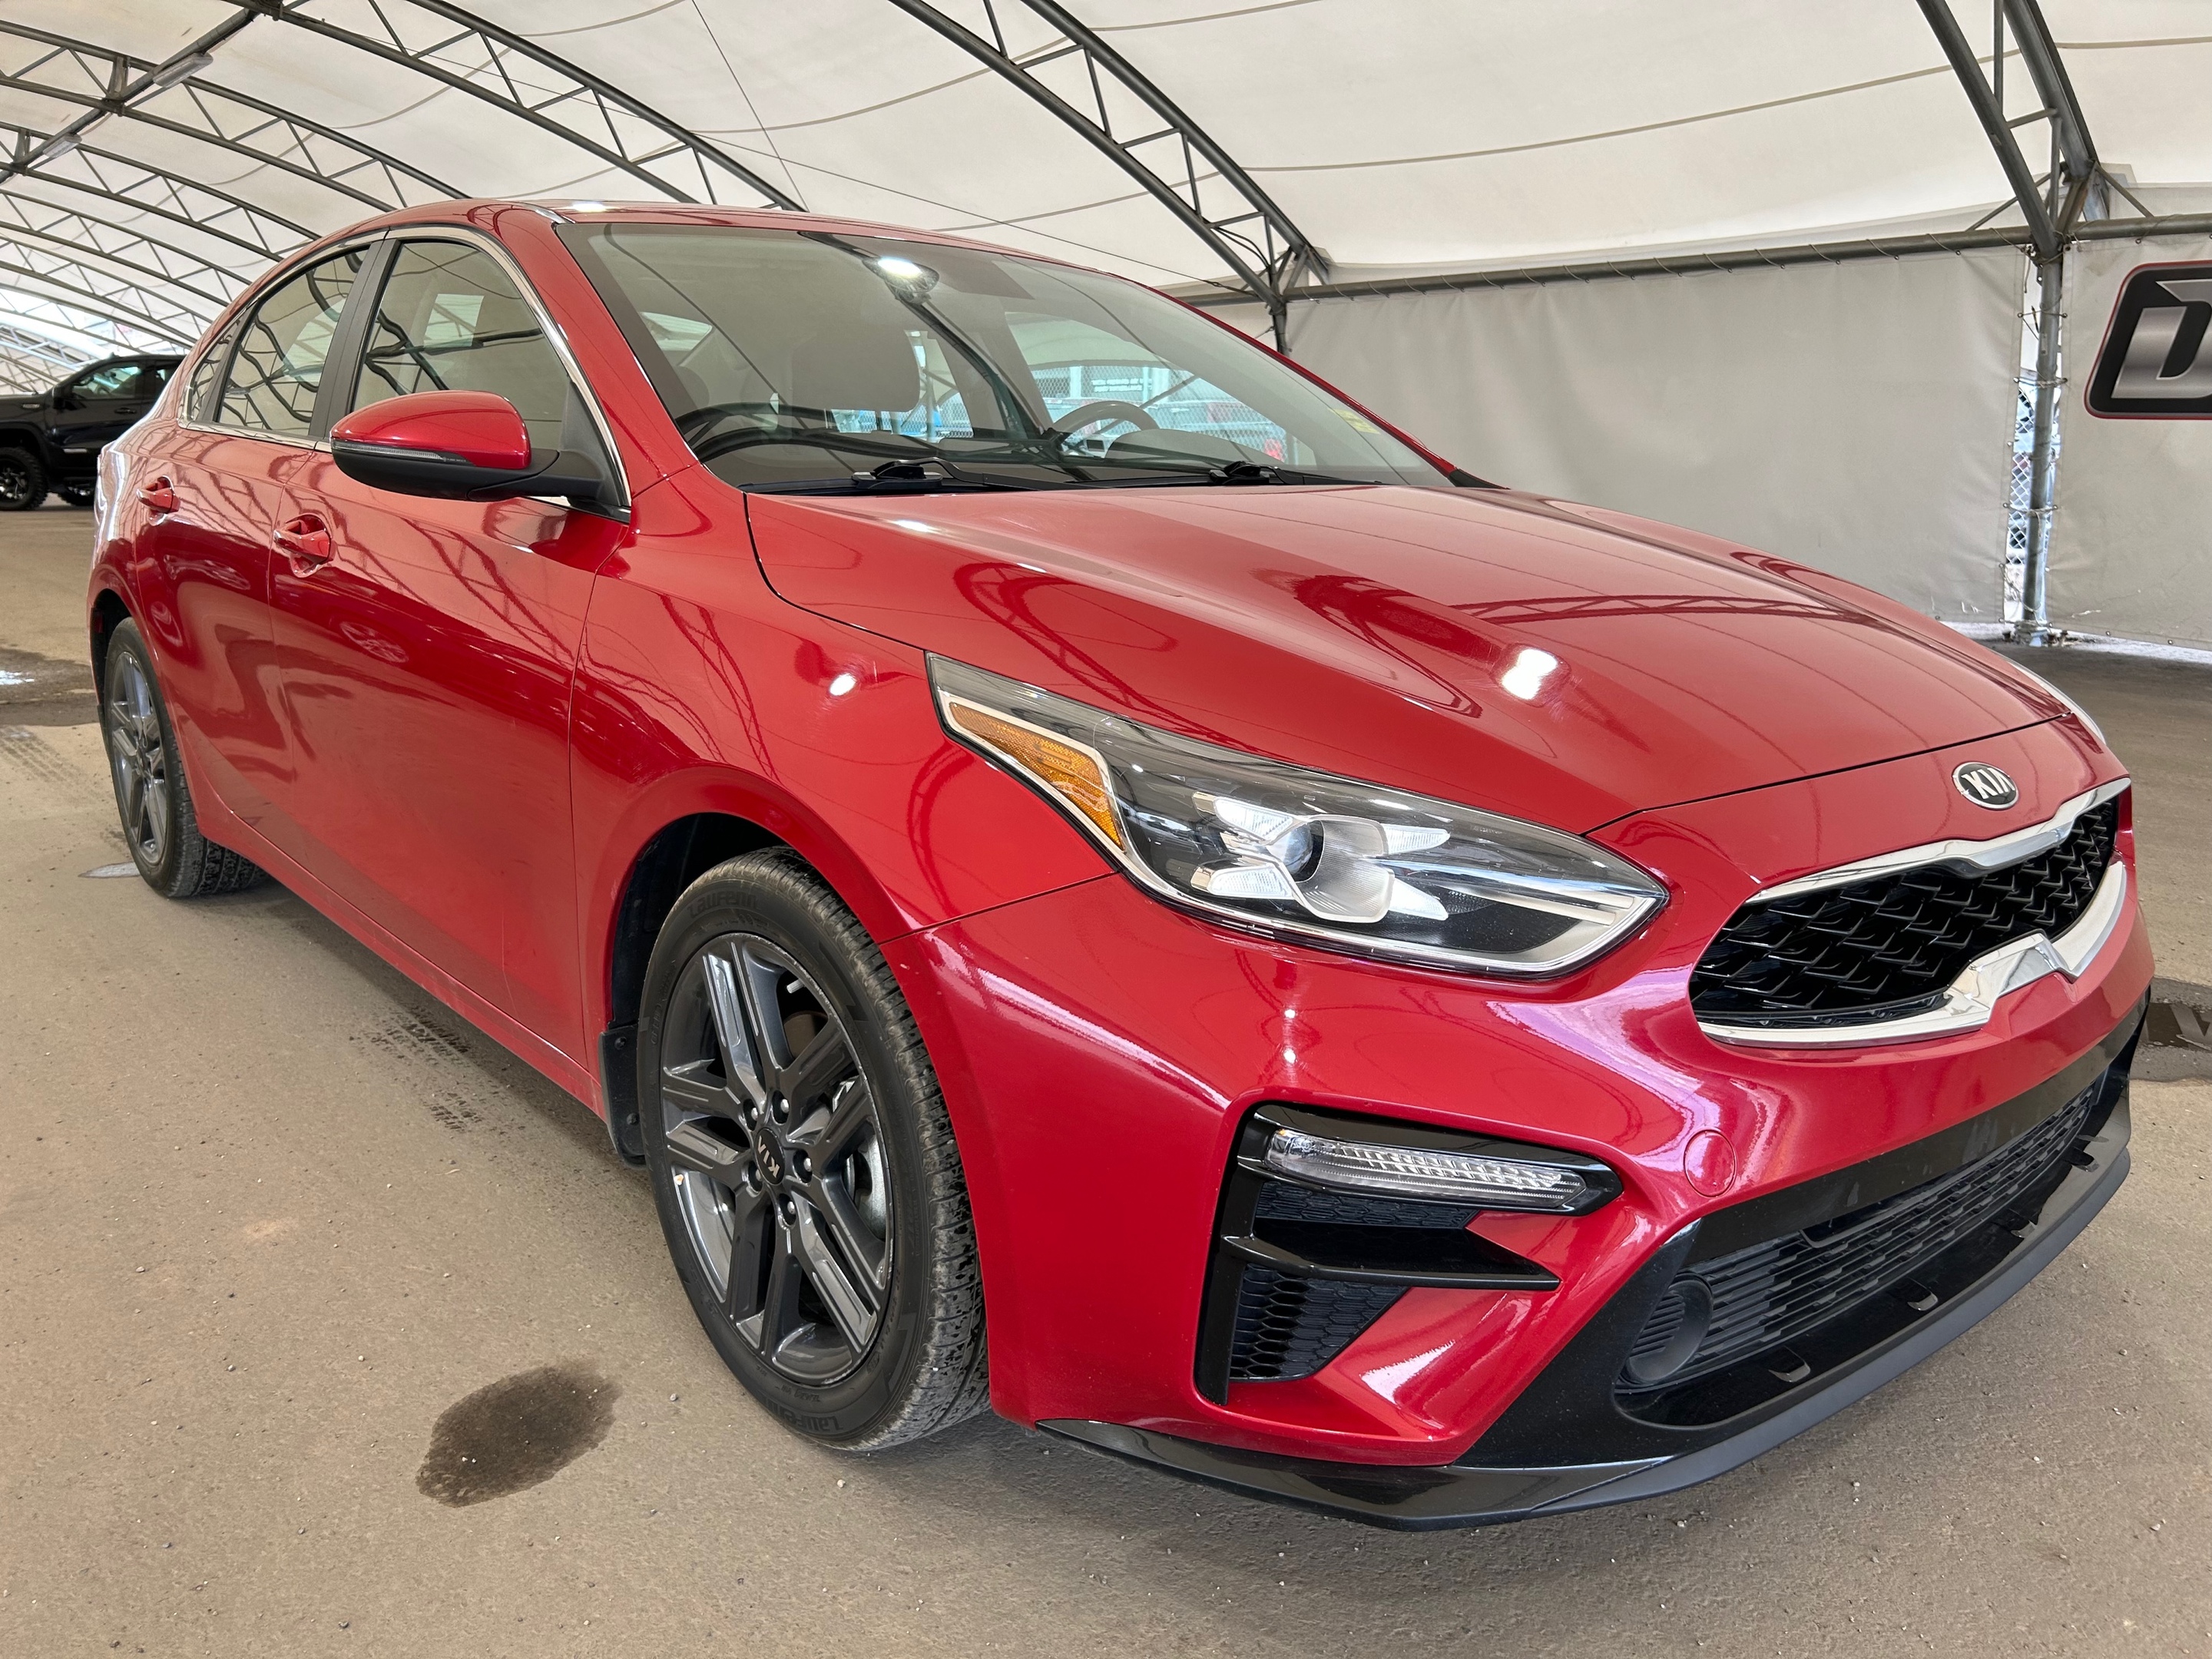 2021 Kia Forte EX NO ACCIDENTS | AUTOMATIC | EX+ PKG. WITH SUNROO